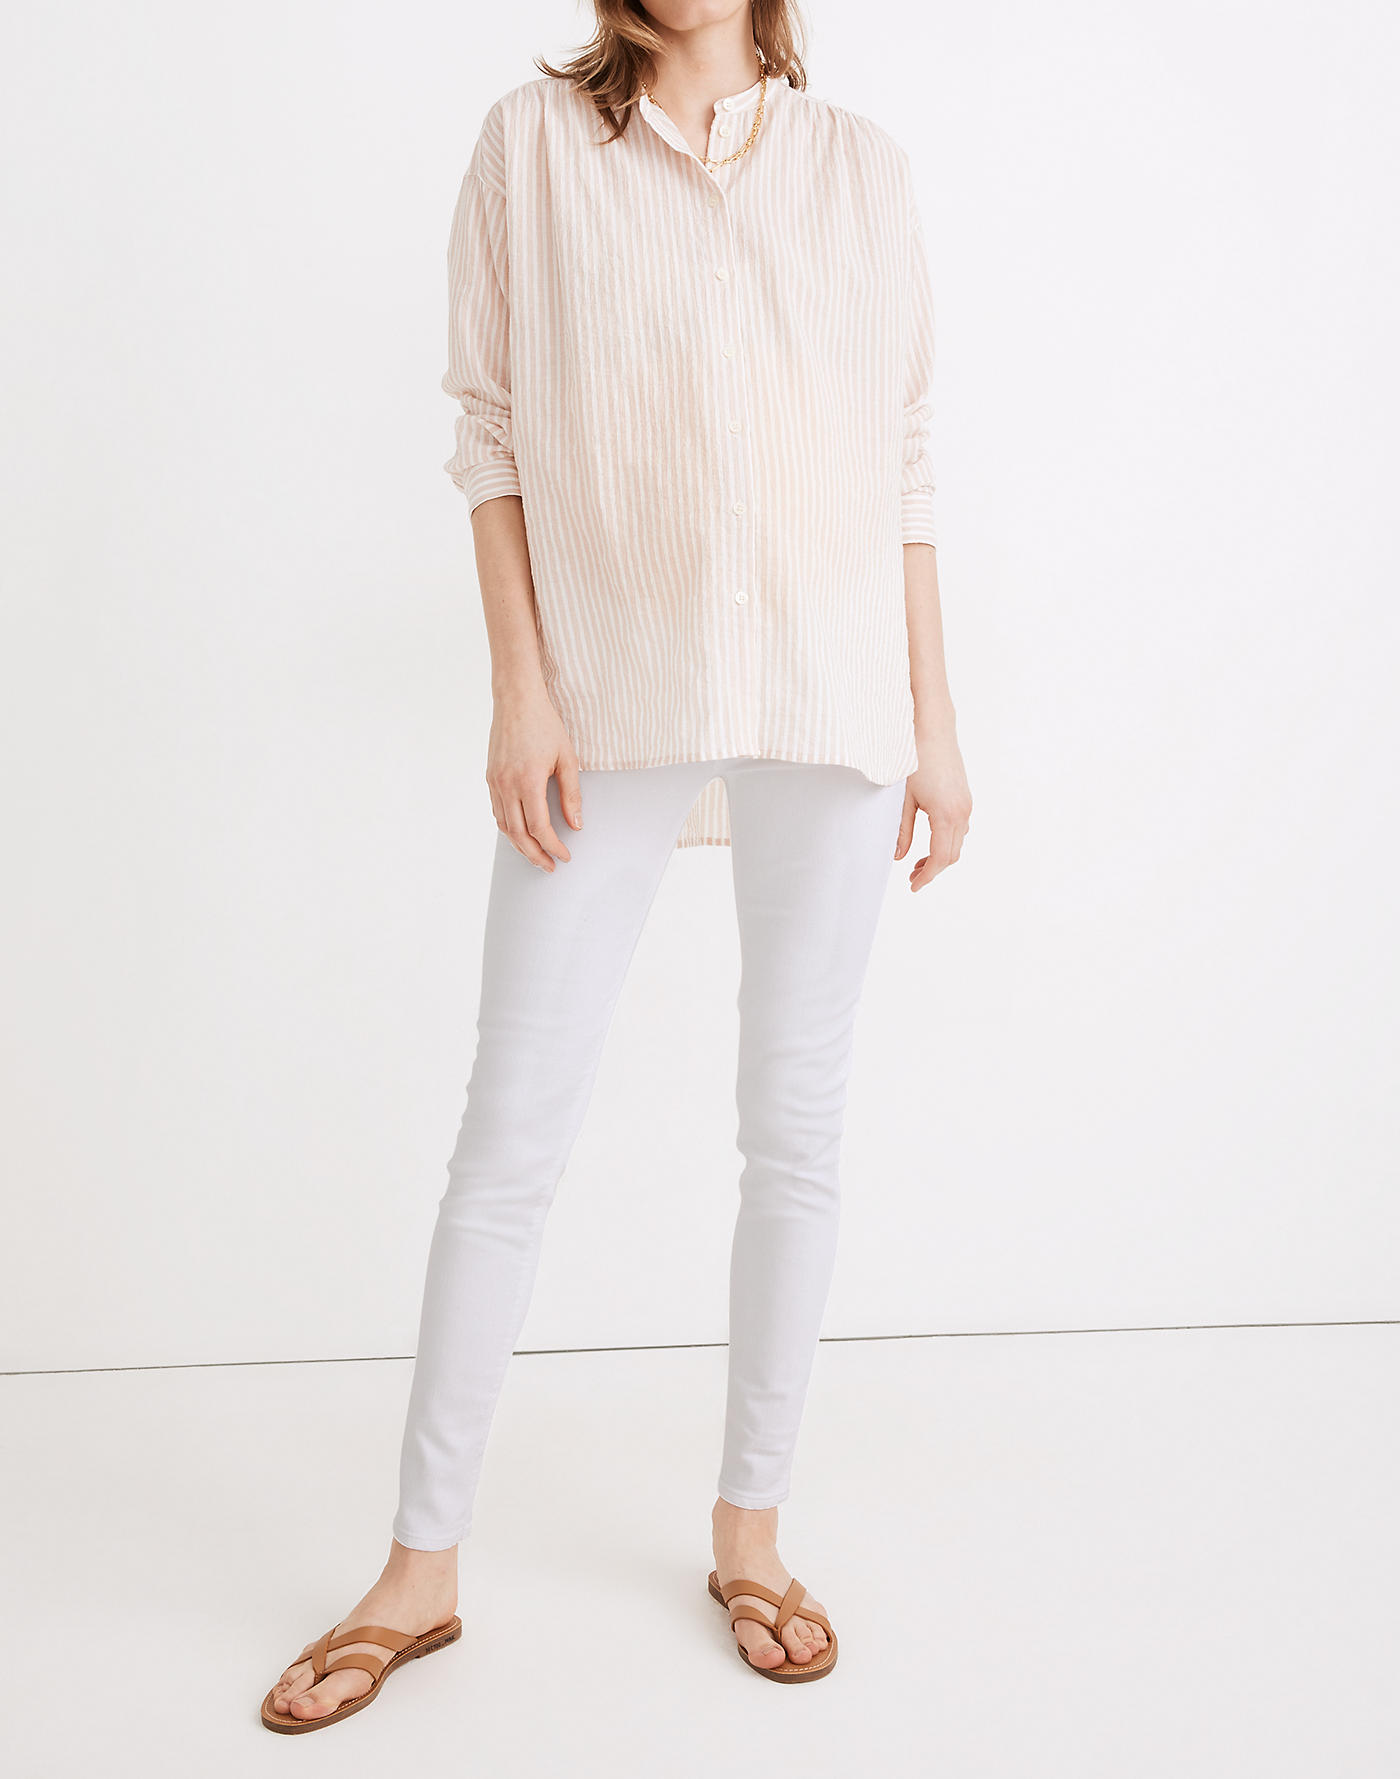 Madewell Maternity Side-Panel Skinny Jeans in Pure White: Adjustable Edition